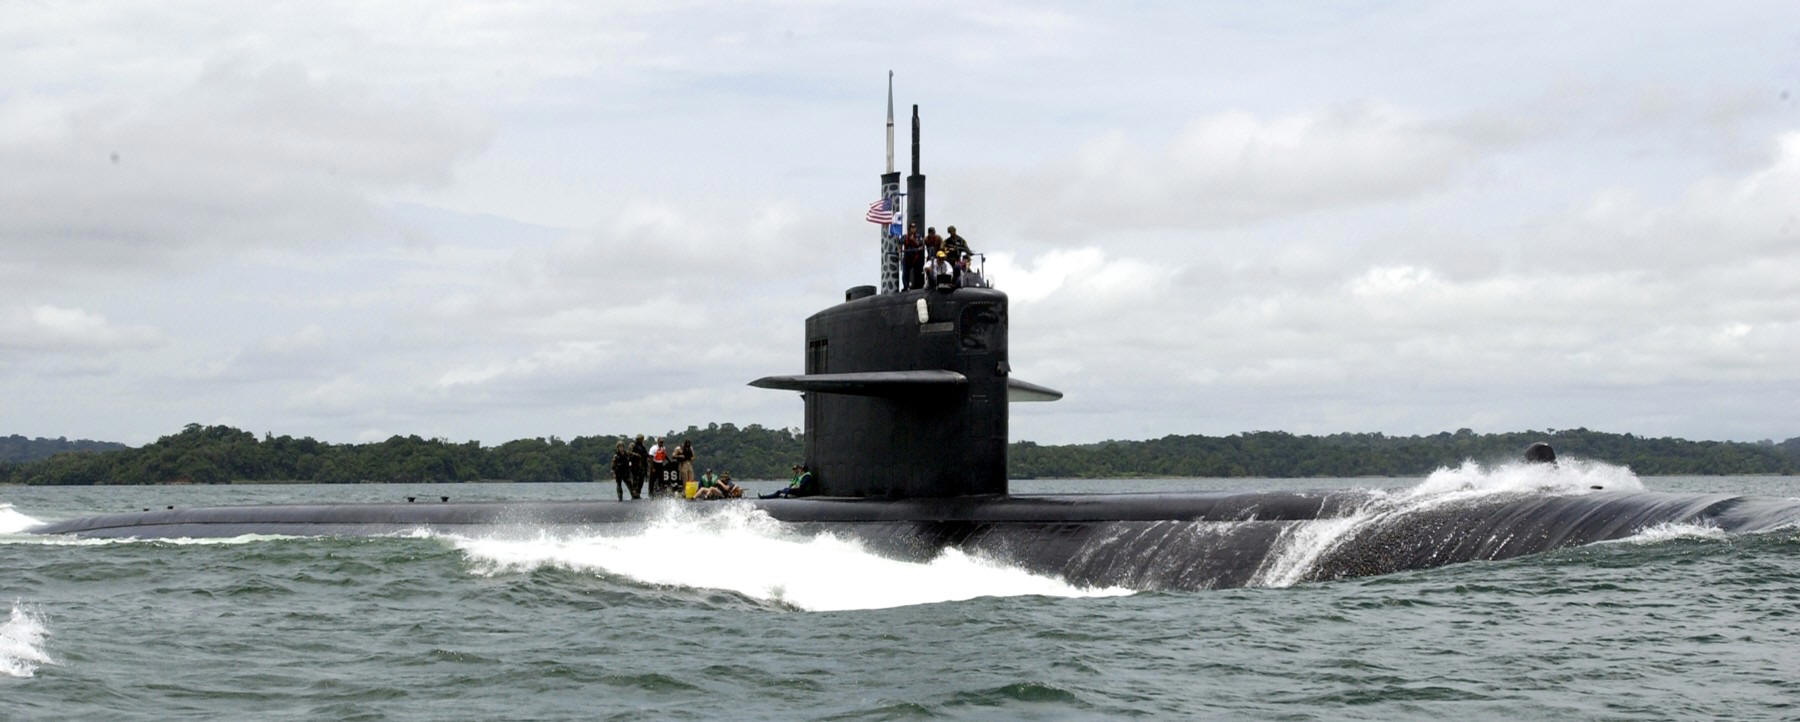 ssn-707 uss portsmouth panama canal 2004